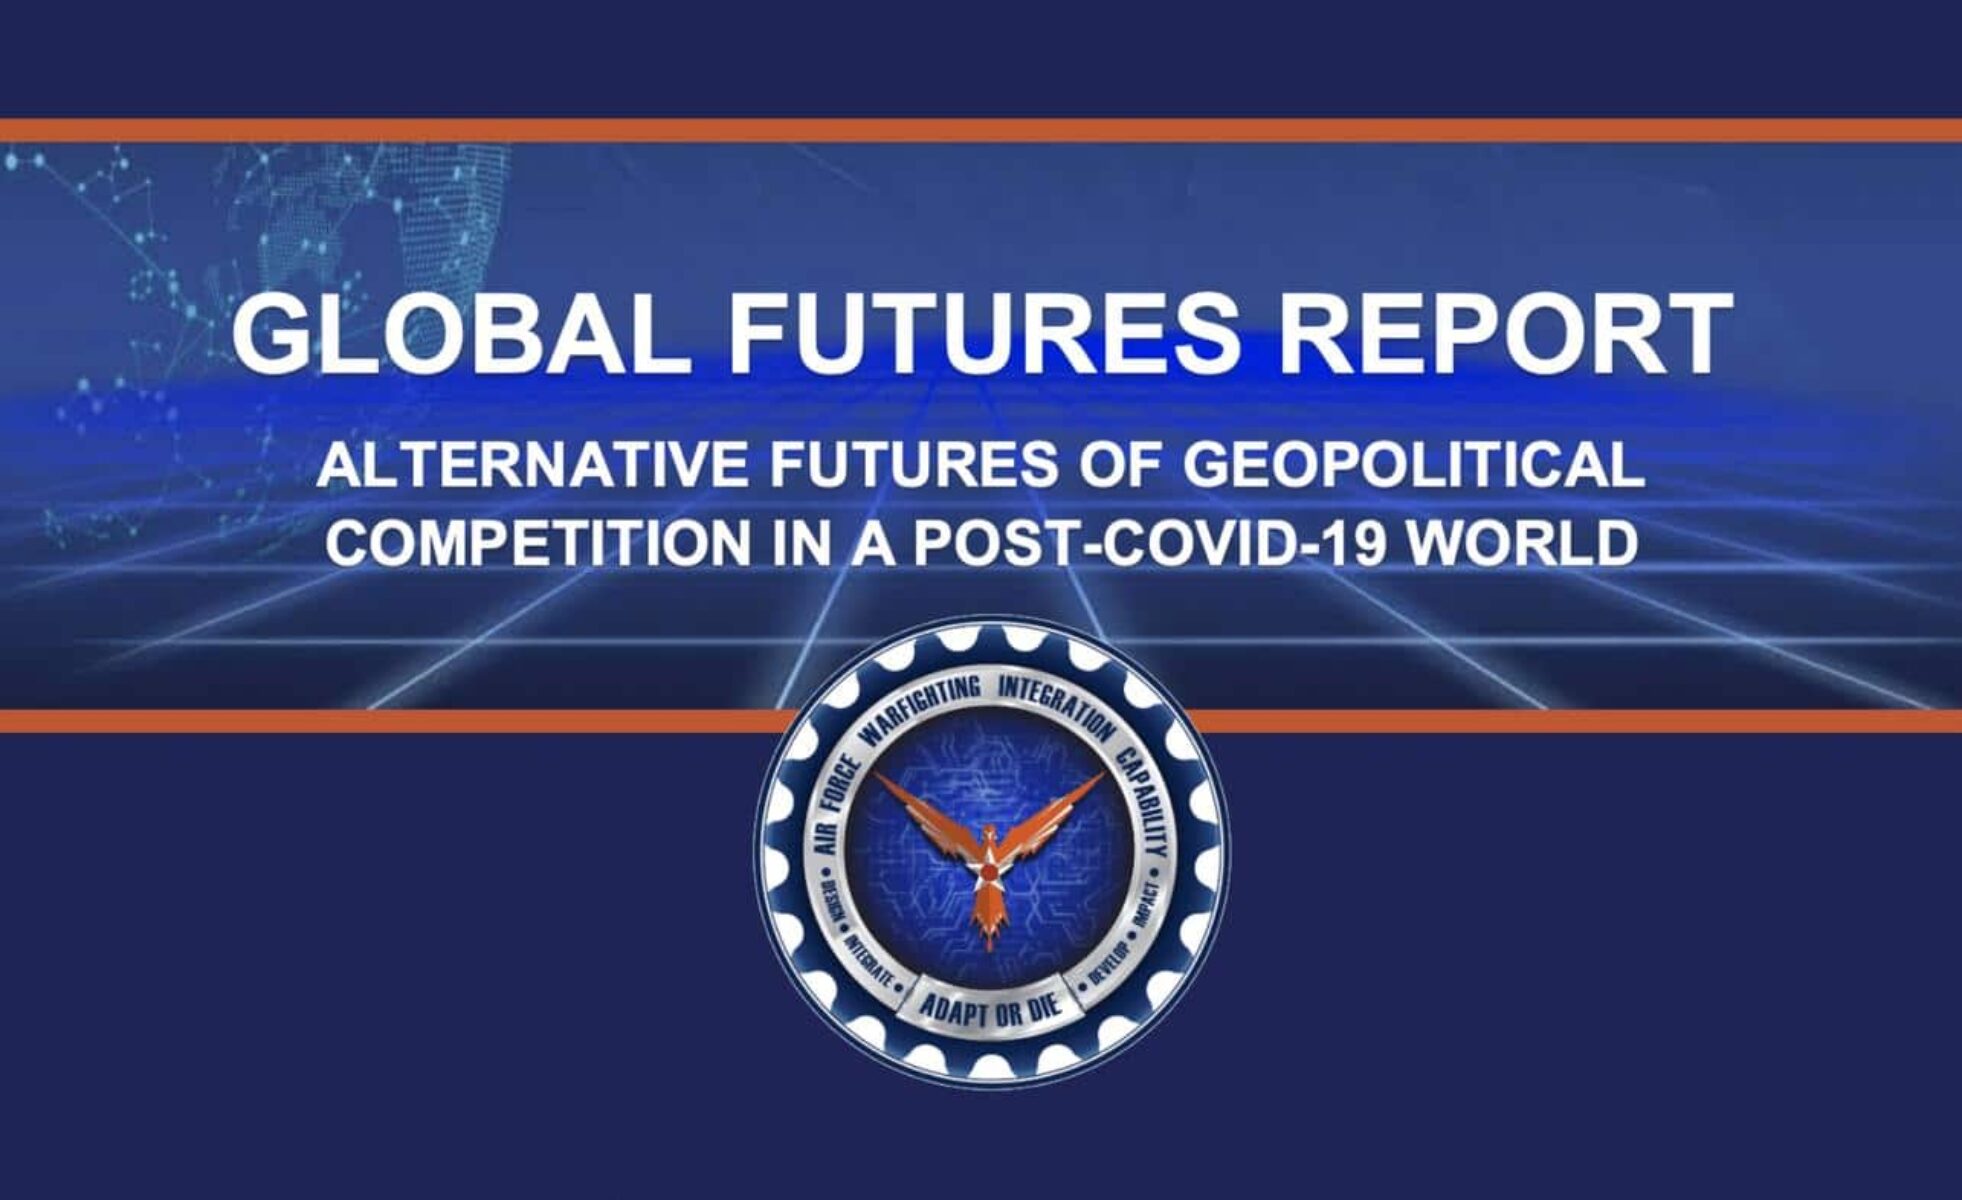 ALTERNATIVE FUTURES OF GEOPOLITICAL COMPETITION IN A POST-COVID-19 WORLD